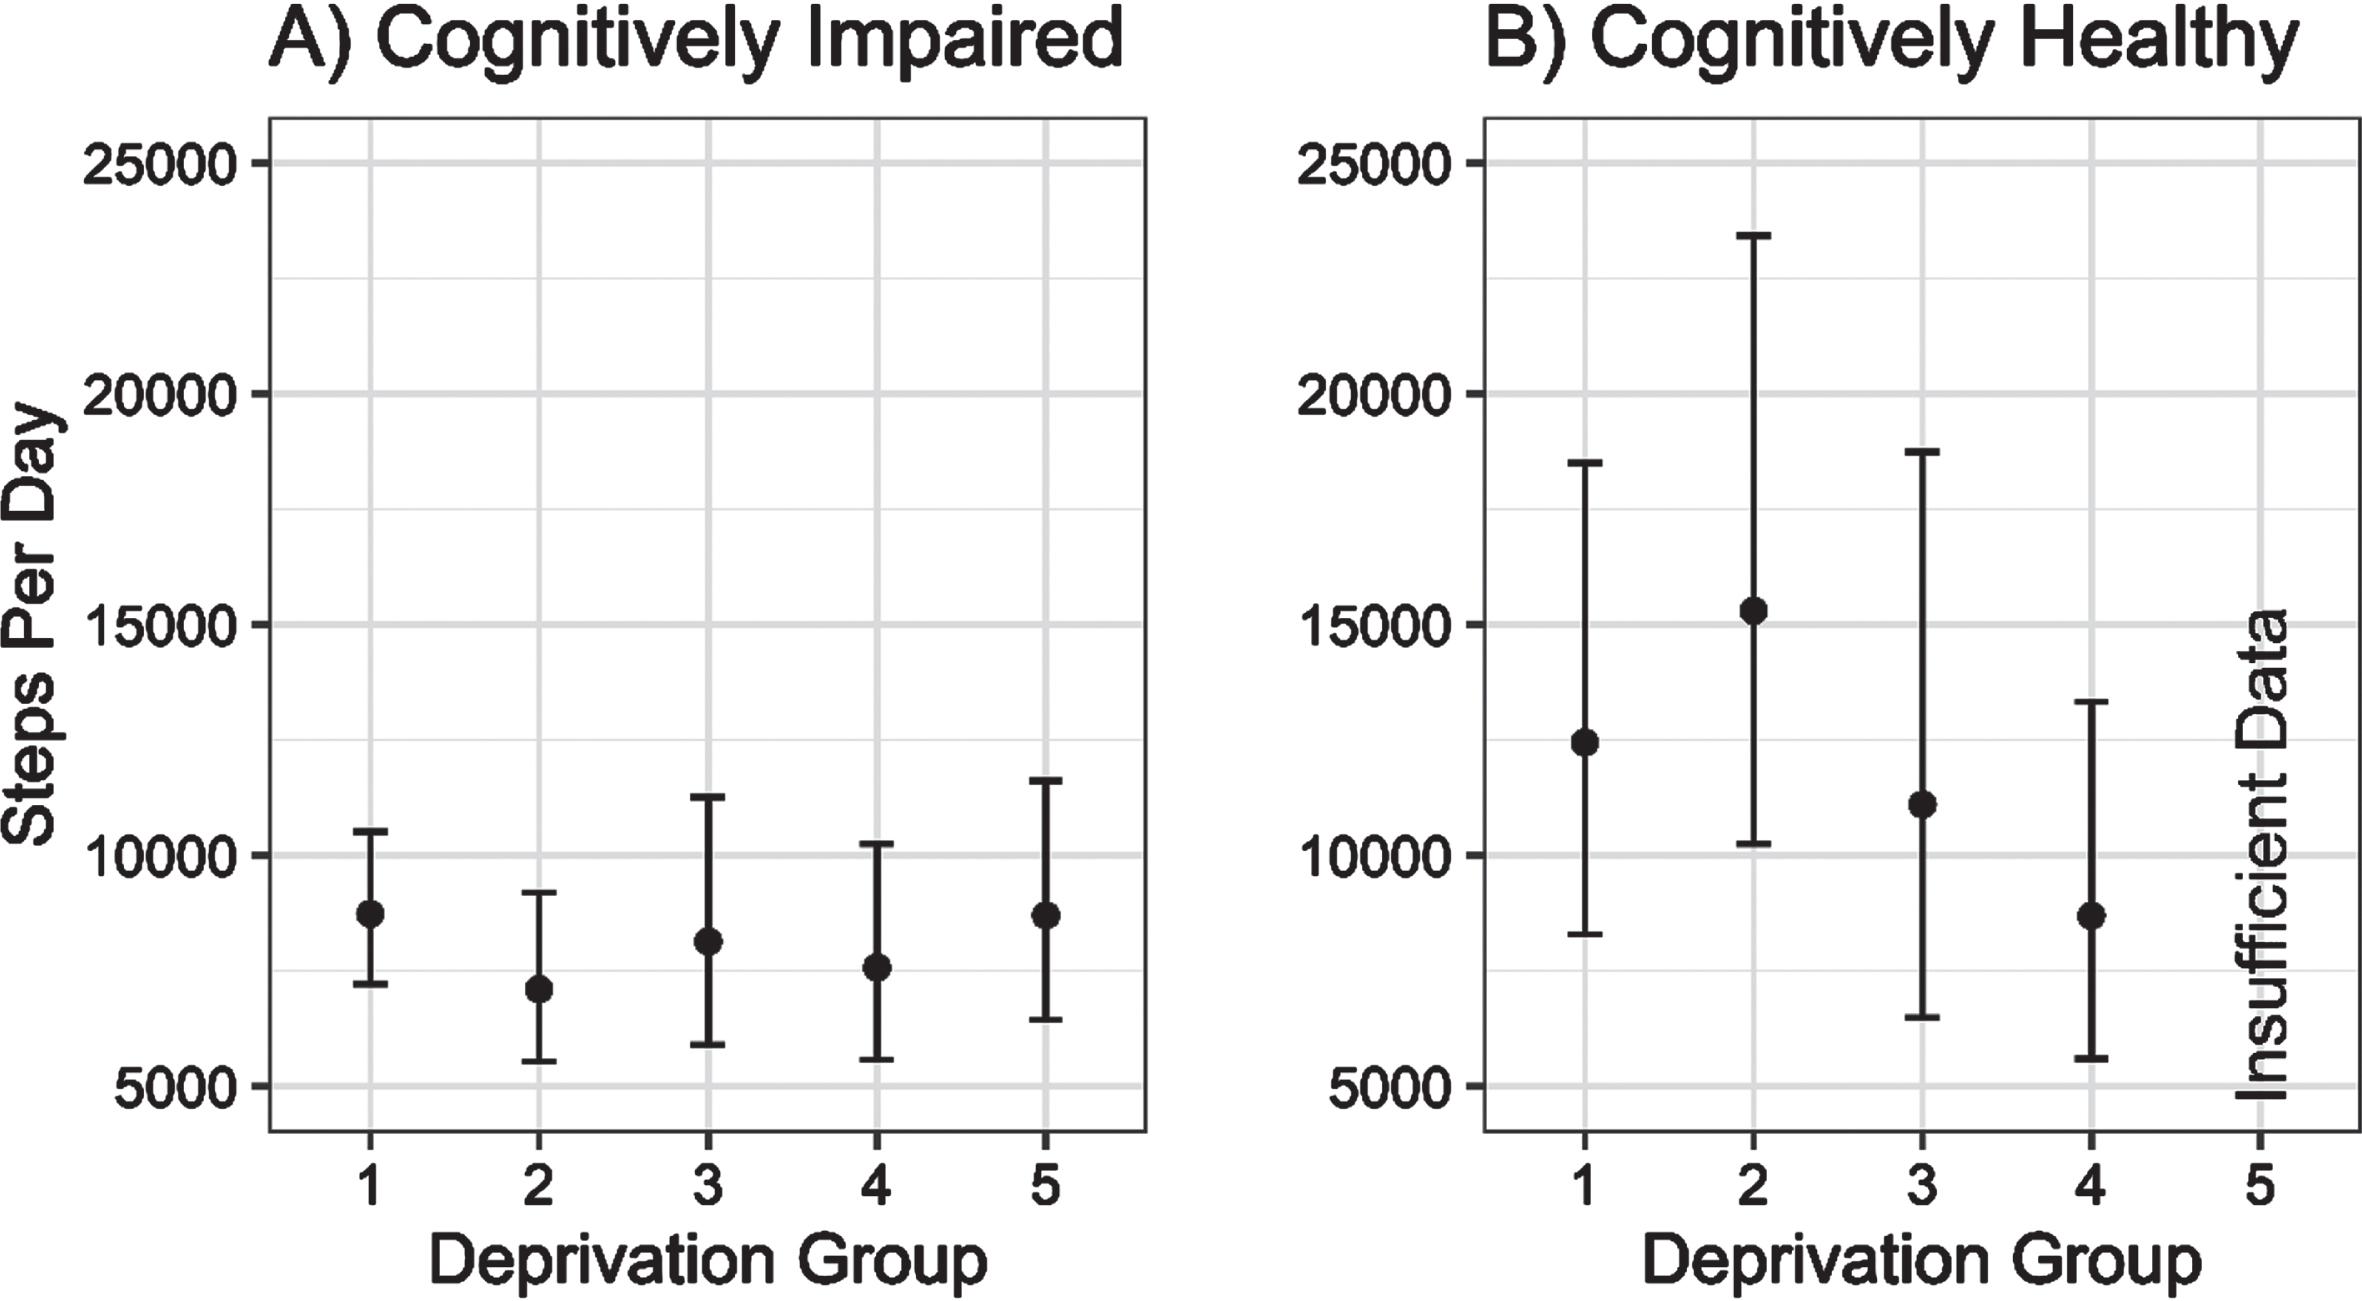 Estimated daily step counts (±95% CI) for cognitively impaired and cognitively unimpaired groups across deprivation fifths from 1 (least deprived) to 5 (most deprived).